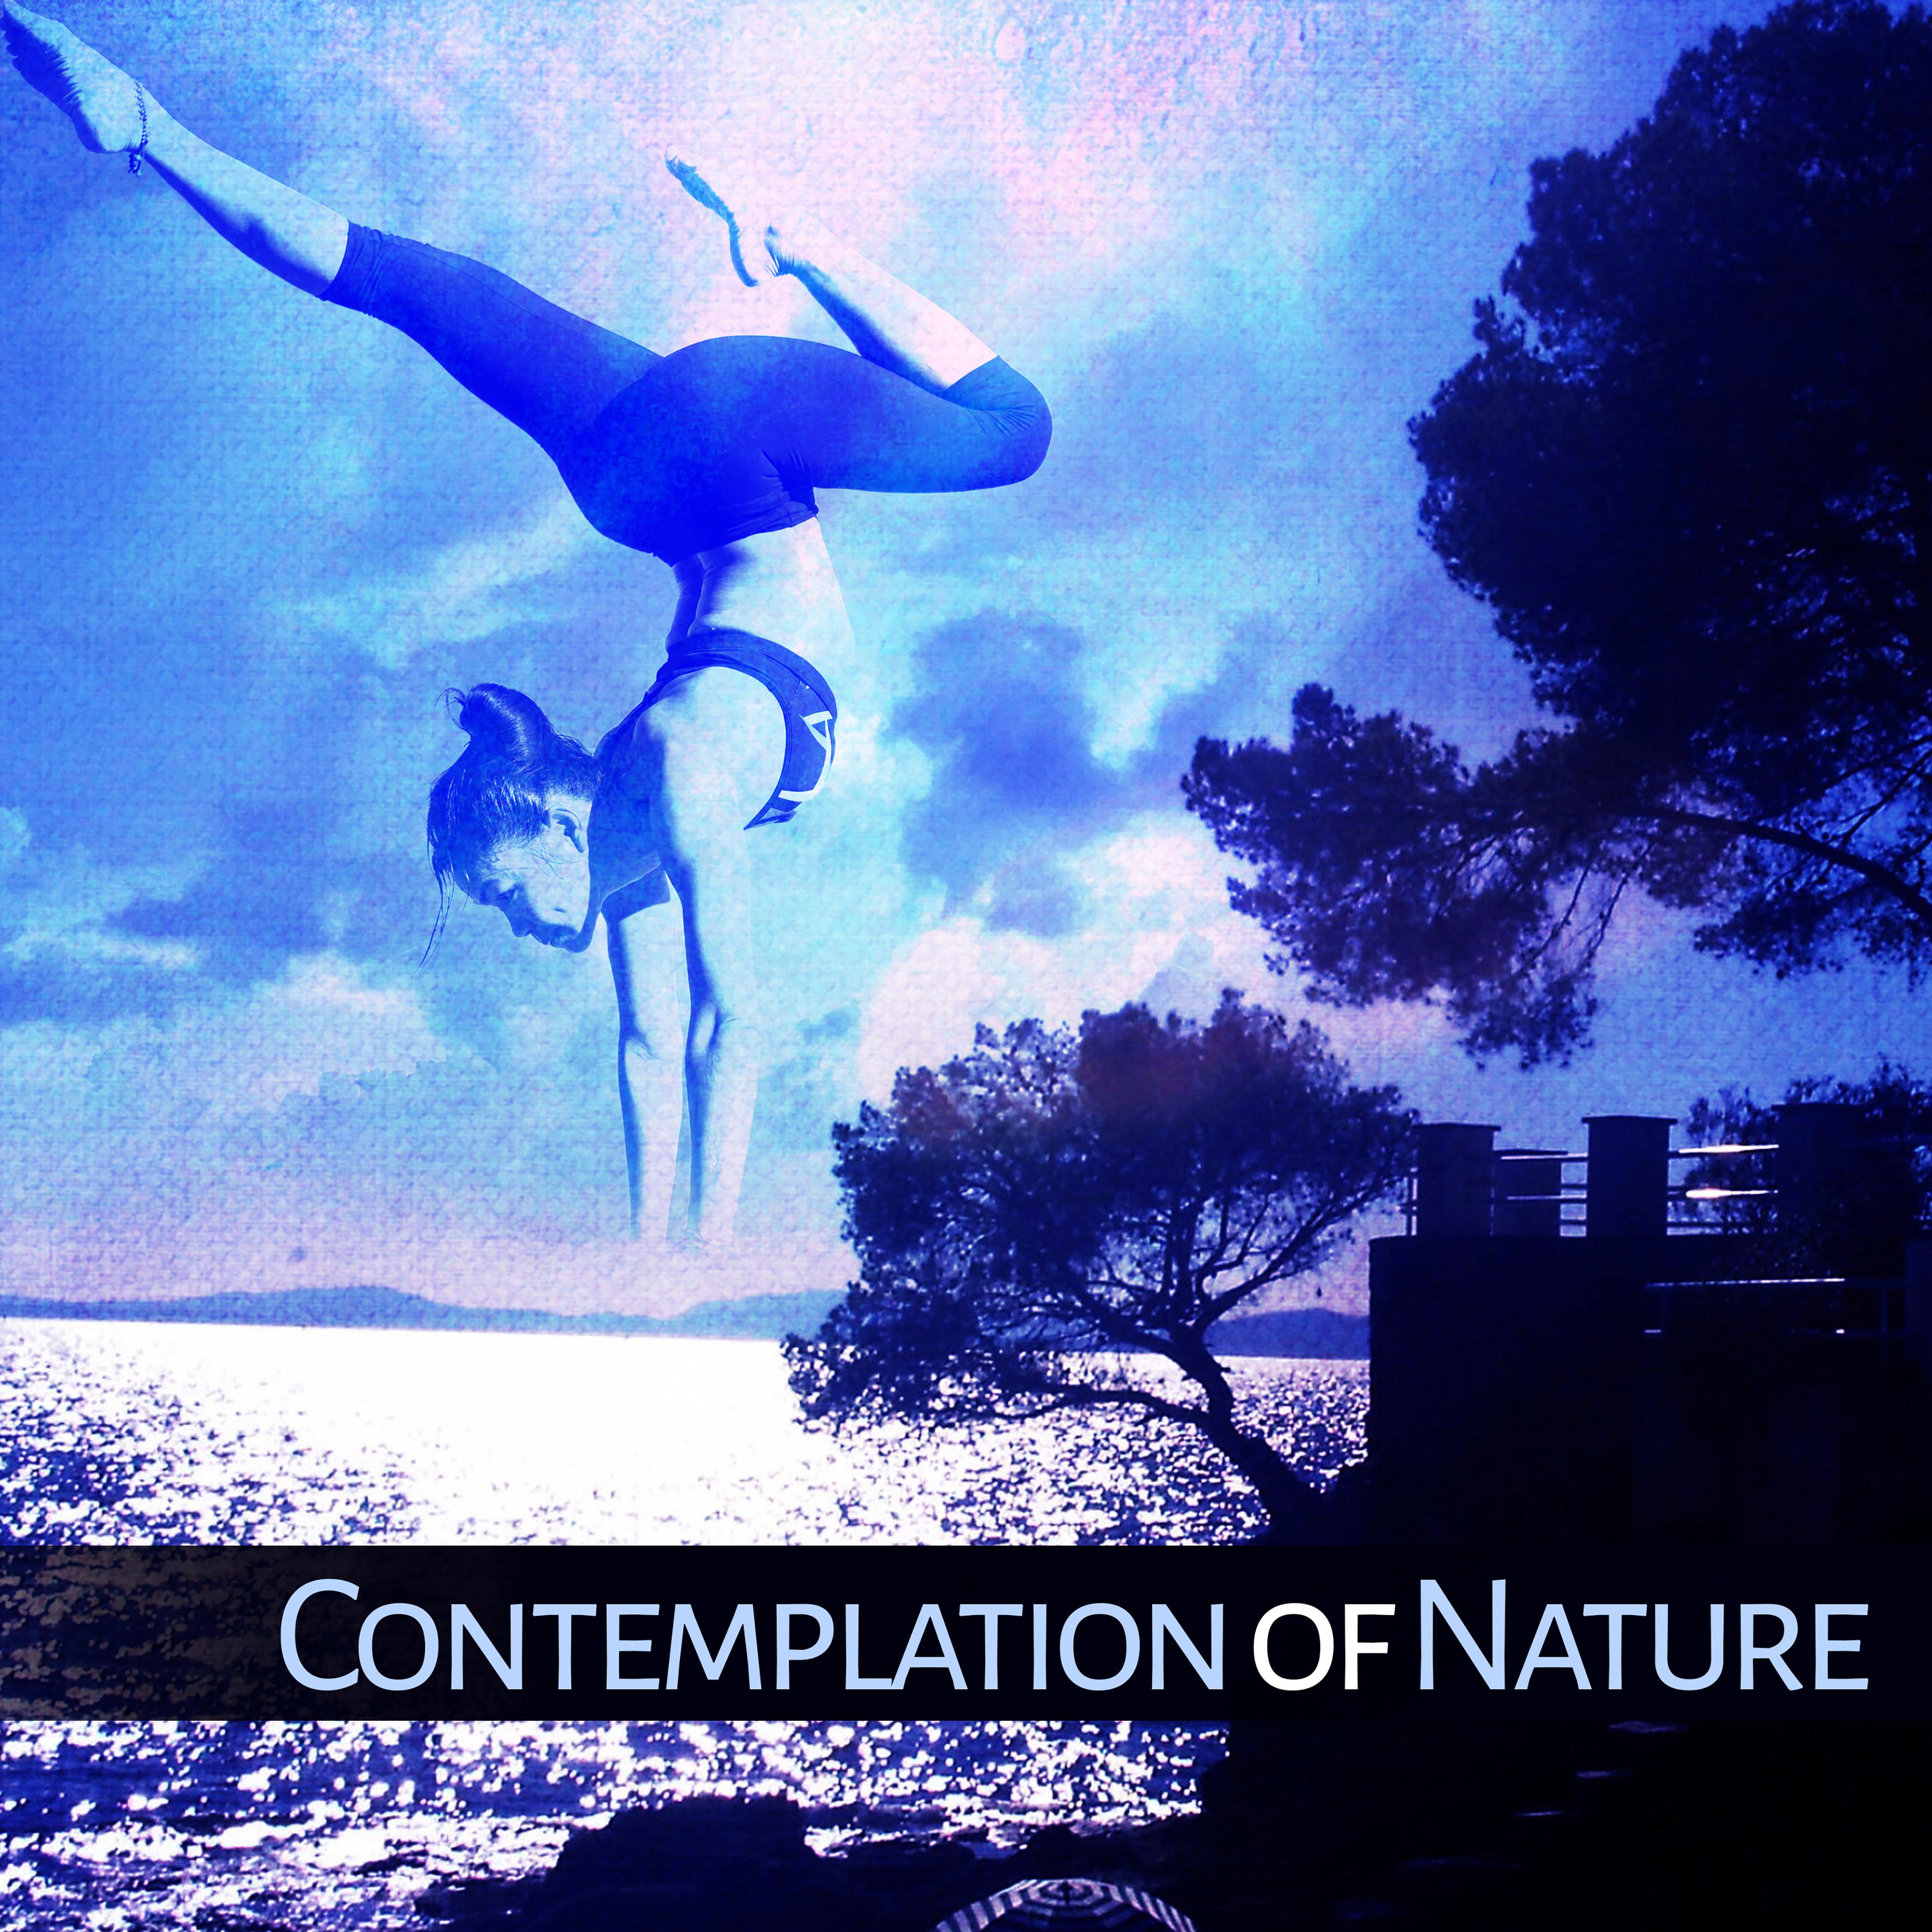 Contemplation of Nature  Peaceful Music for Meditation, Yoga, Nature Sounds, Relaxation, Harmony  Calmness, Pure Mind